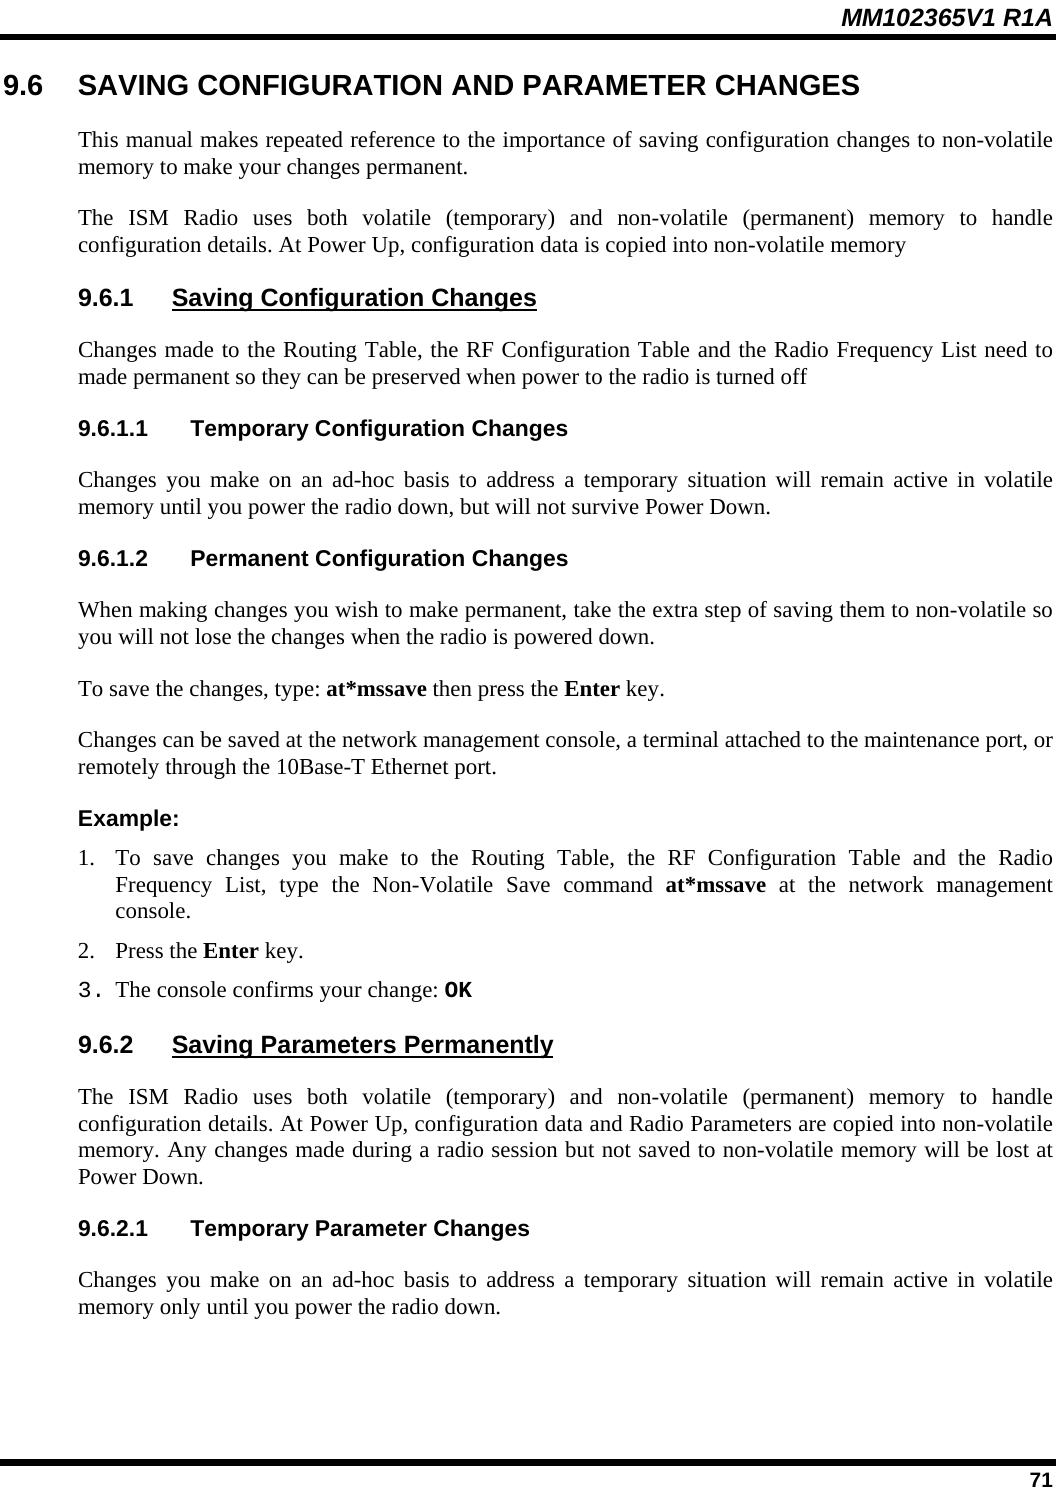 MM102365V1 R1A 9.6  SAVING CONFIGURATION AND PARAMETER CHANGES This manual makes repeated reference to the importance of saving configuration changes to non-volatile memory to make your changes permanent. The ISM Radio uses both volatile (temporary) and non-volatile (permanent) memory to handle configuration details. At Power Up, configuration data is copied into non-volatile memory 9.6.1  Saving Configuration Changes Changes made to the Routing Table, the RF Configuration Table and the Radio Frequency List need to made permanent so they can be preserved when power to the radio is turned off 9.6.1.1  Temporary Configuration Changes Changes you make on an ad-hoc basis to address a temporary situation will remain active in volatile memory until you power the radio down, but will not survive Power Down. 9.6.1.2  Permanent Configuration Changes When making changes you wish to make permanent, take the extra step of saving them to non-volatile so you will not lose the changes when the radio is powered down. To save the changes, type: at*mssave then press the Enter key. Changes can be saved at the network management console, a terminal attached to the maintenance port, or remotely through the 10Base-T Ethernet port. Example: 1.  To save changes you make to the Routing Table, the RF Configuration Table and the Radio Frequency List, type the Non-Volatile Save command at*mssave at the network management console.  2. Press the Enter key. 3. The console confirms your change: OK 9.6.2  Saving Parameters Permanently The ISM Radio uses both volatile (temporary) and non-volatile (permanent) memory to handle configuration details. At Power Up, configuration data and Radio Parameters are copied into non-volatile memory. Any changes made during a radio session but not saved to non-volatile memory will be lost at Power Down. 9.6.2.1  Temporary Parameter Changes Changes you make on an ad-hoc basis to address a temporary situation will remain active in volatile memory only until you power the radio down.  71 